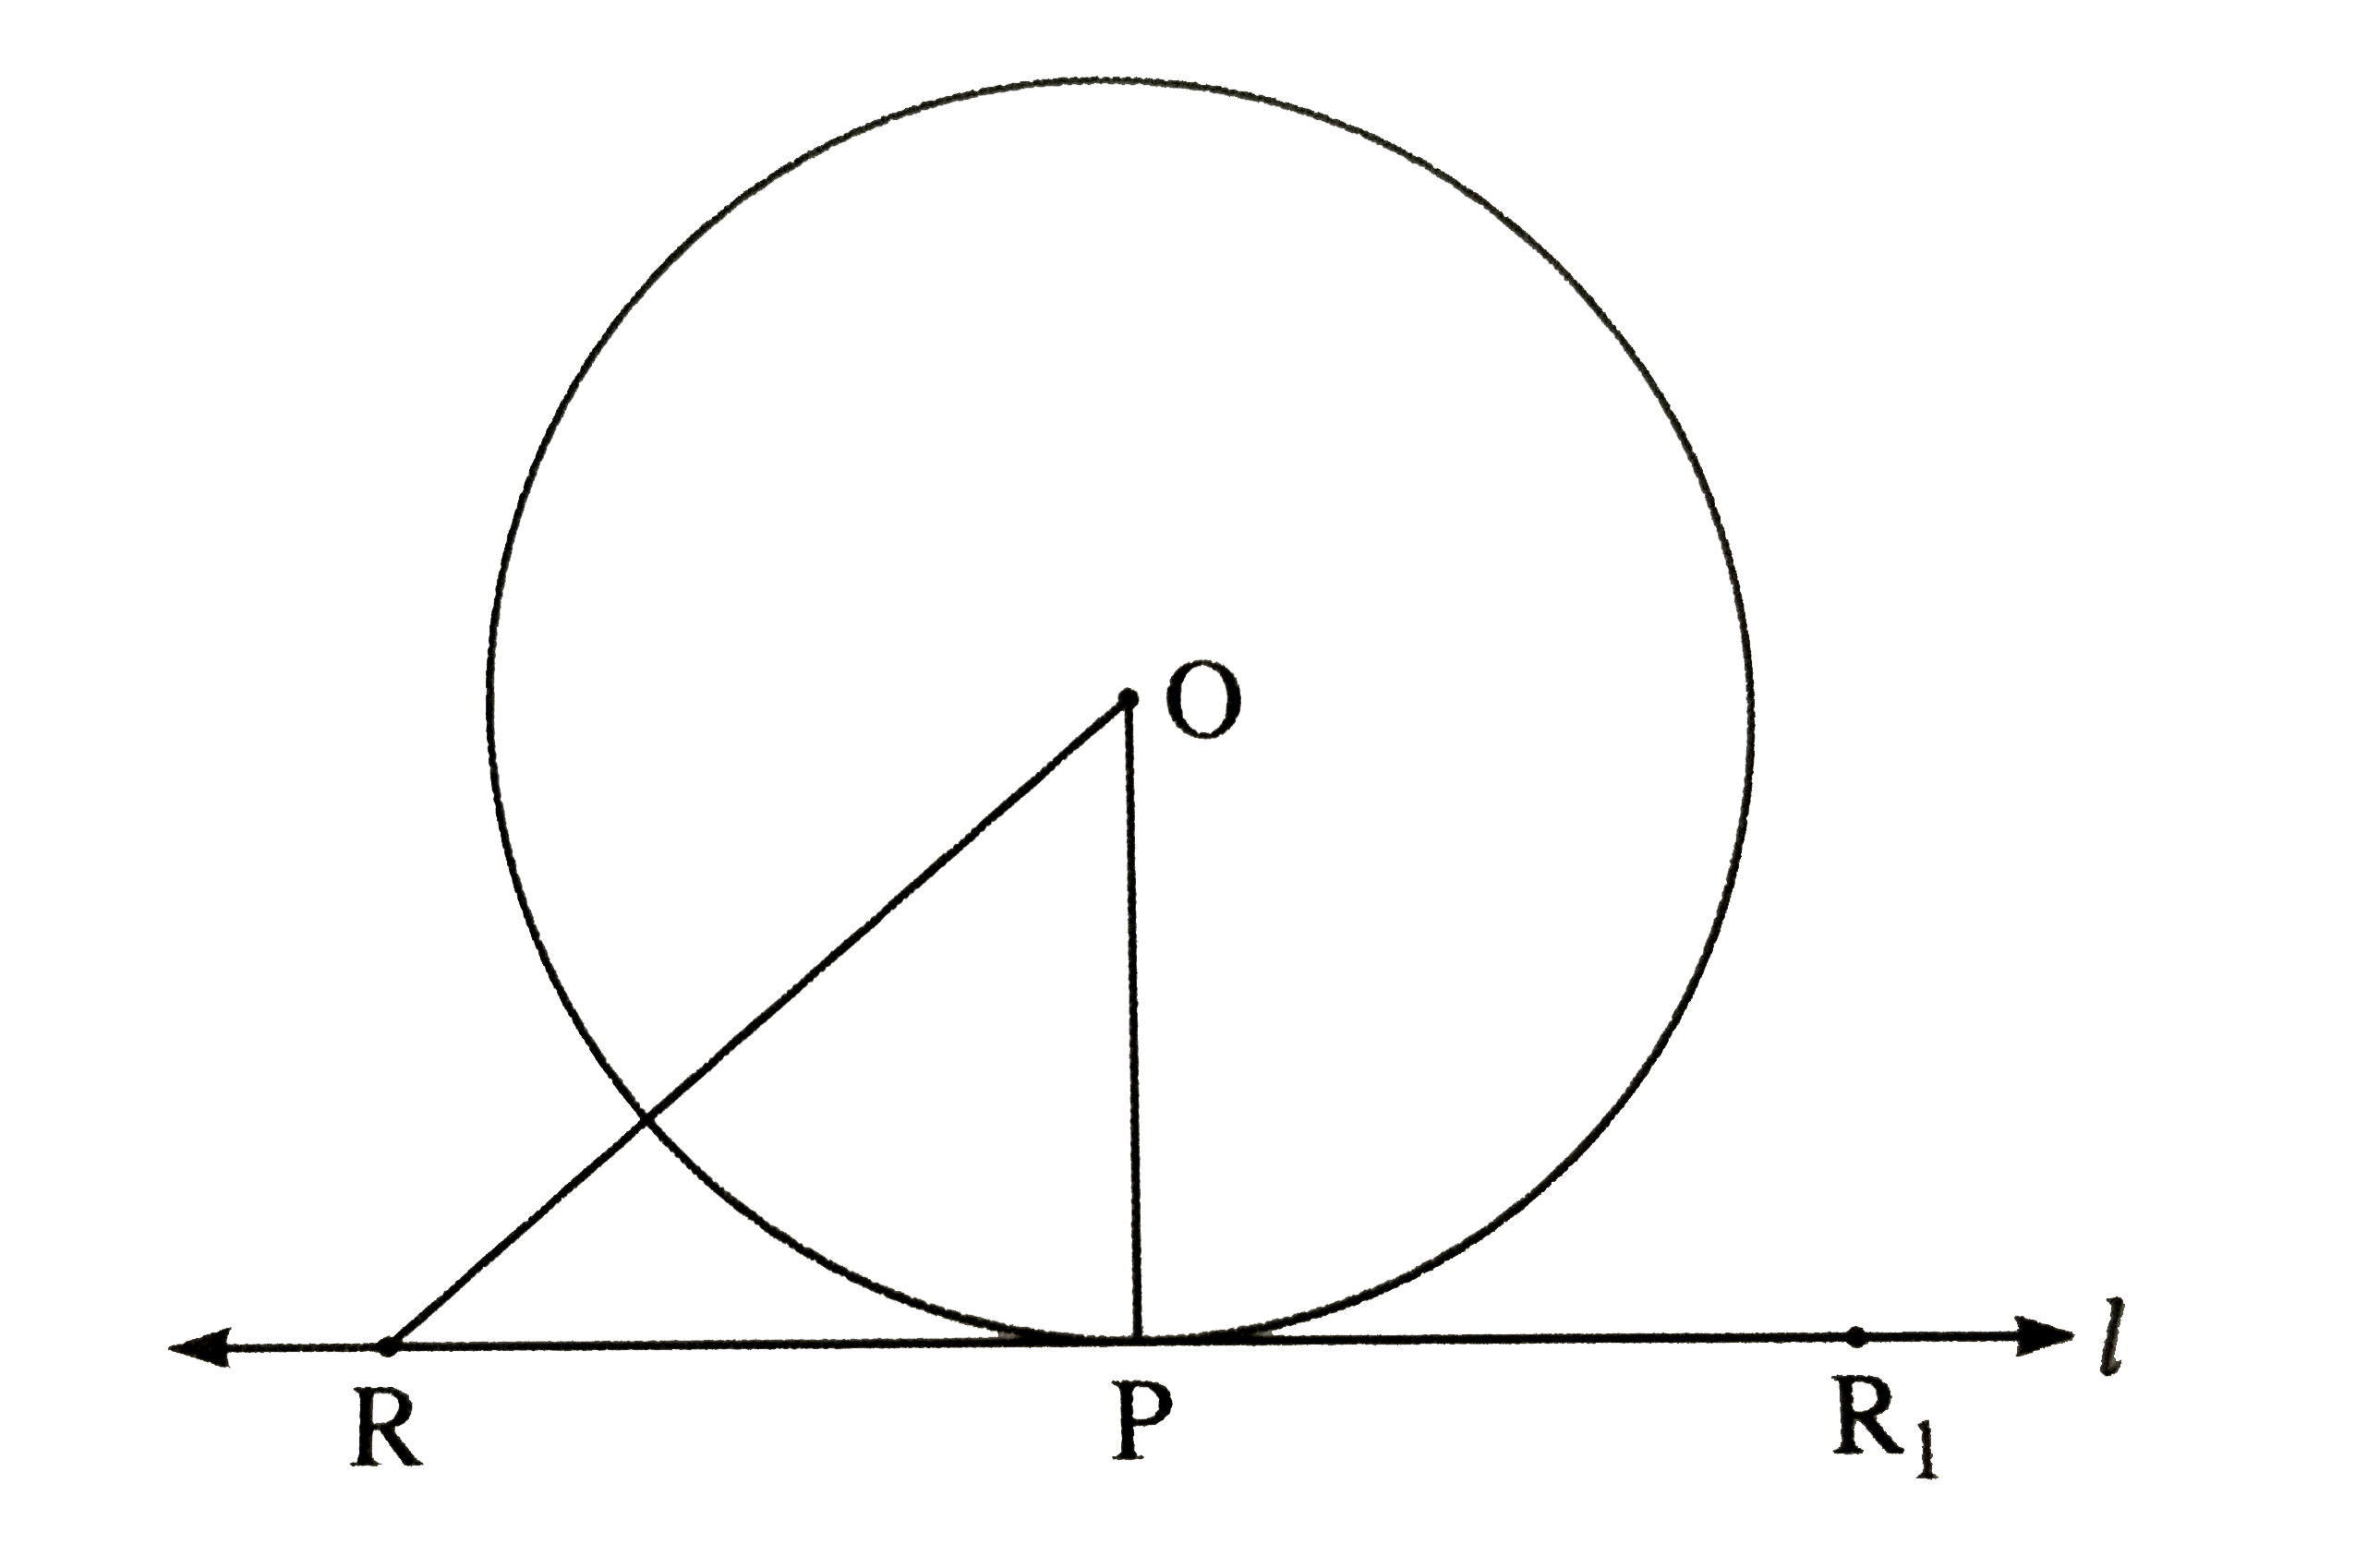 Line l touches a circle with centre O at point P. If radius of the circle is 9 cm, answer the following:   If d(O,R)=15 cm, how many locations of point R are line on l? At what distance will each of them be from point P?